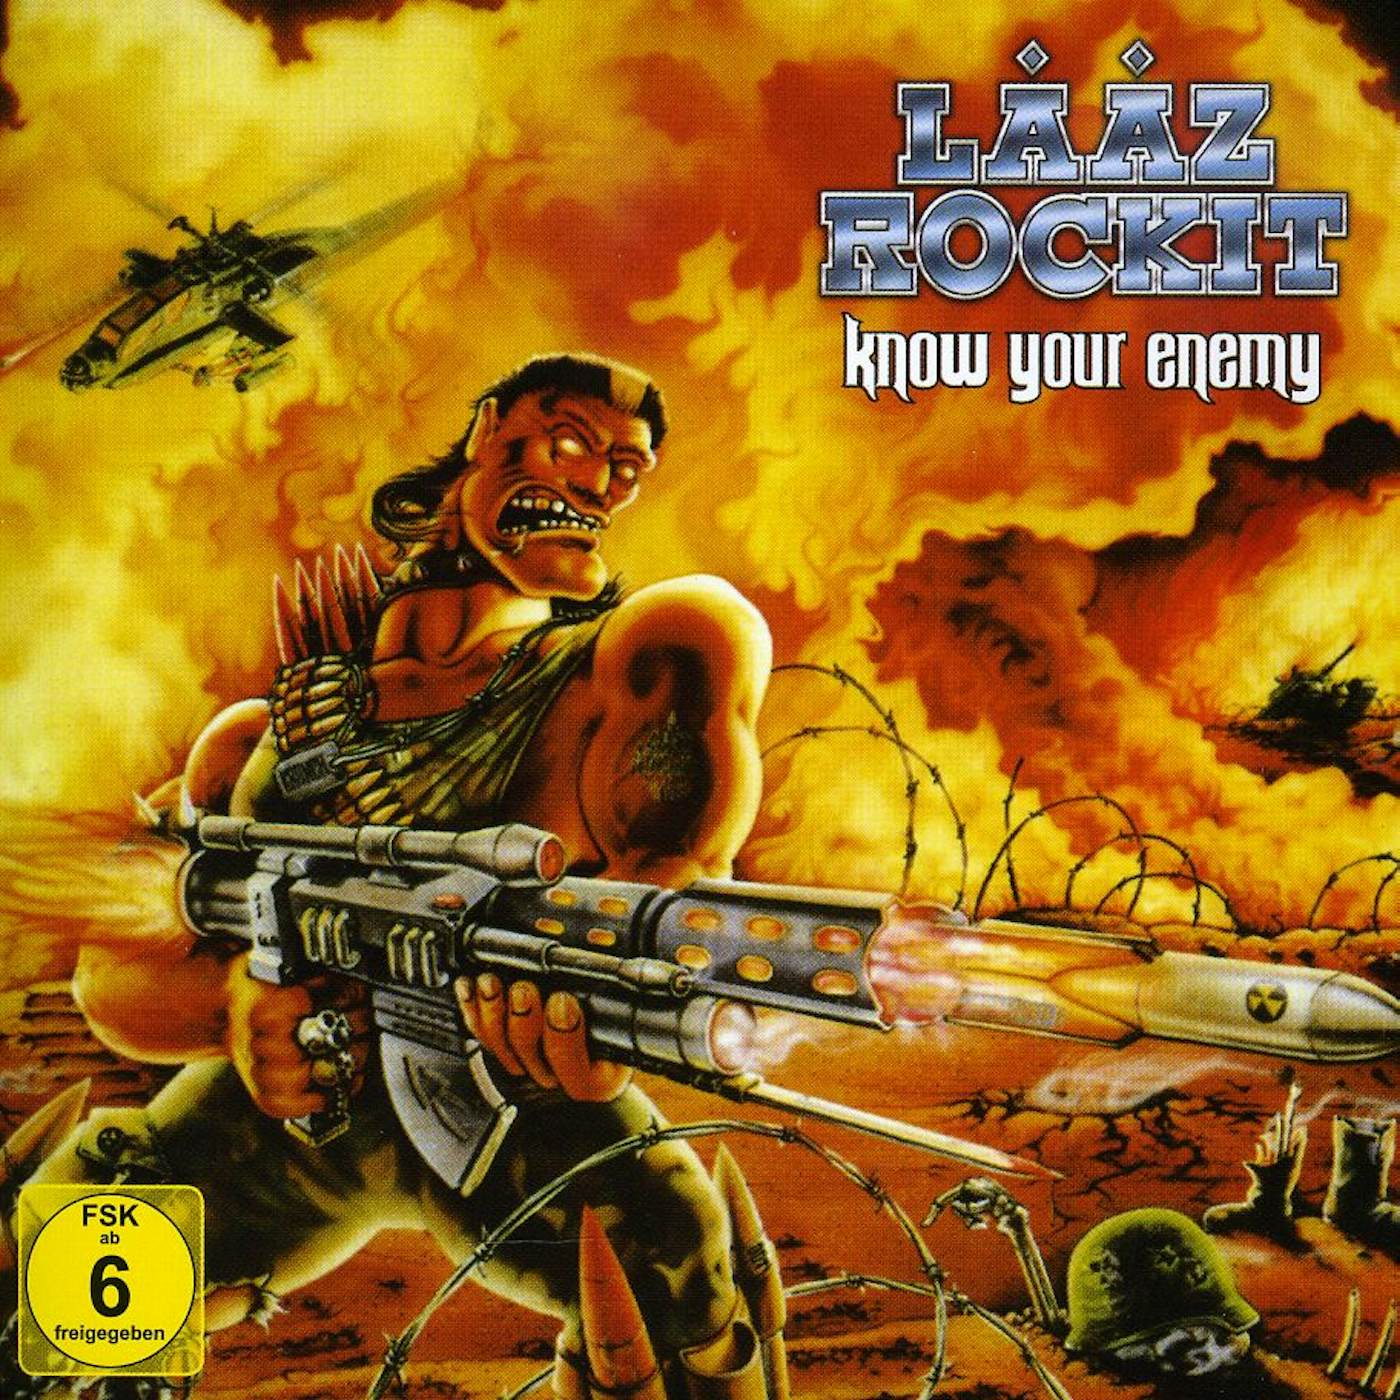 Laaz Rockit KNOW YOUR ENEMY CD